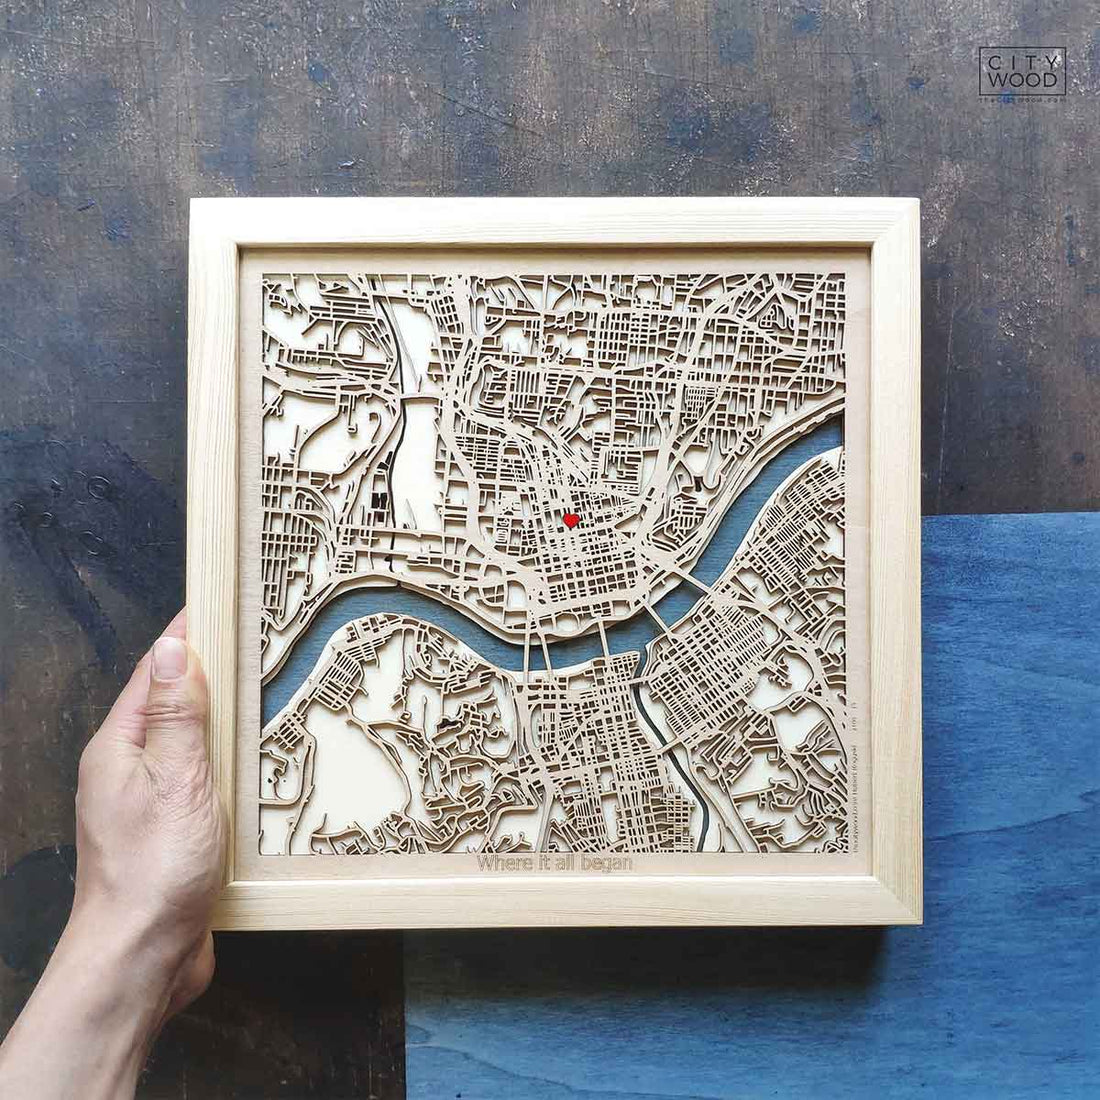 Unique Anniversary Gifts for Him: Personalized Engraved Wooden Maps | Handcrafted & Customized